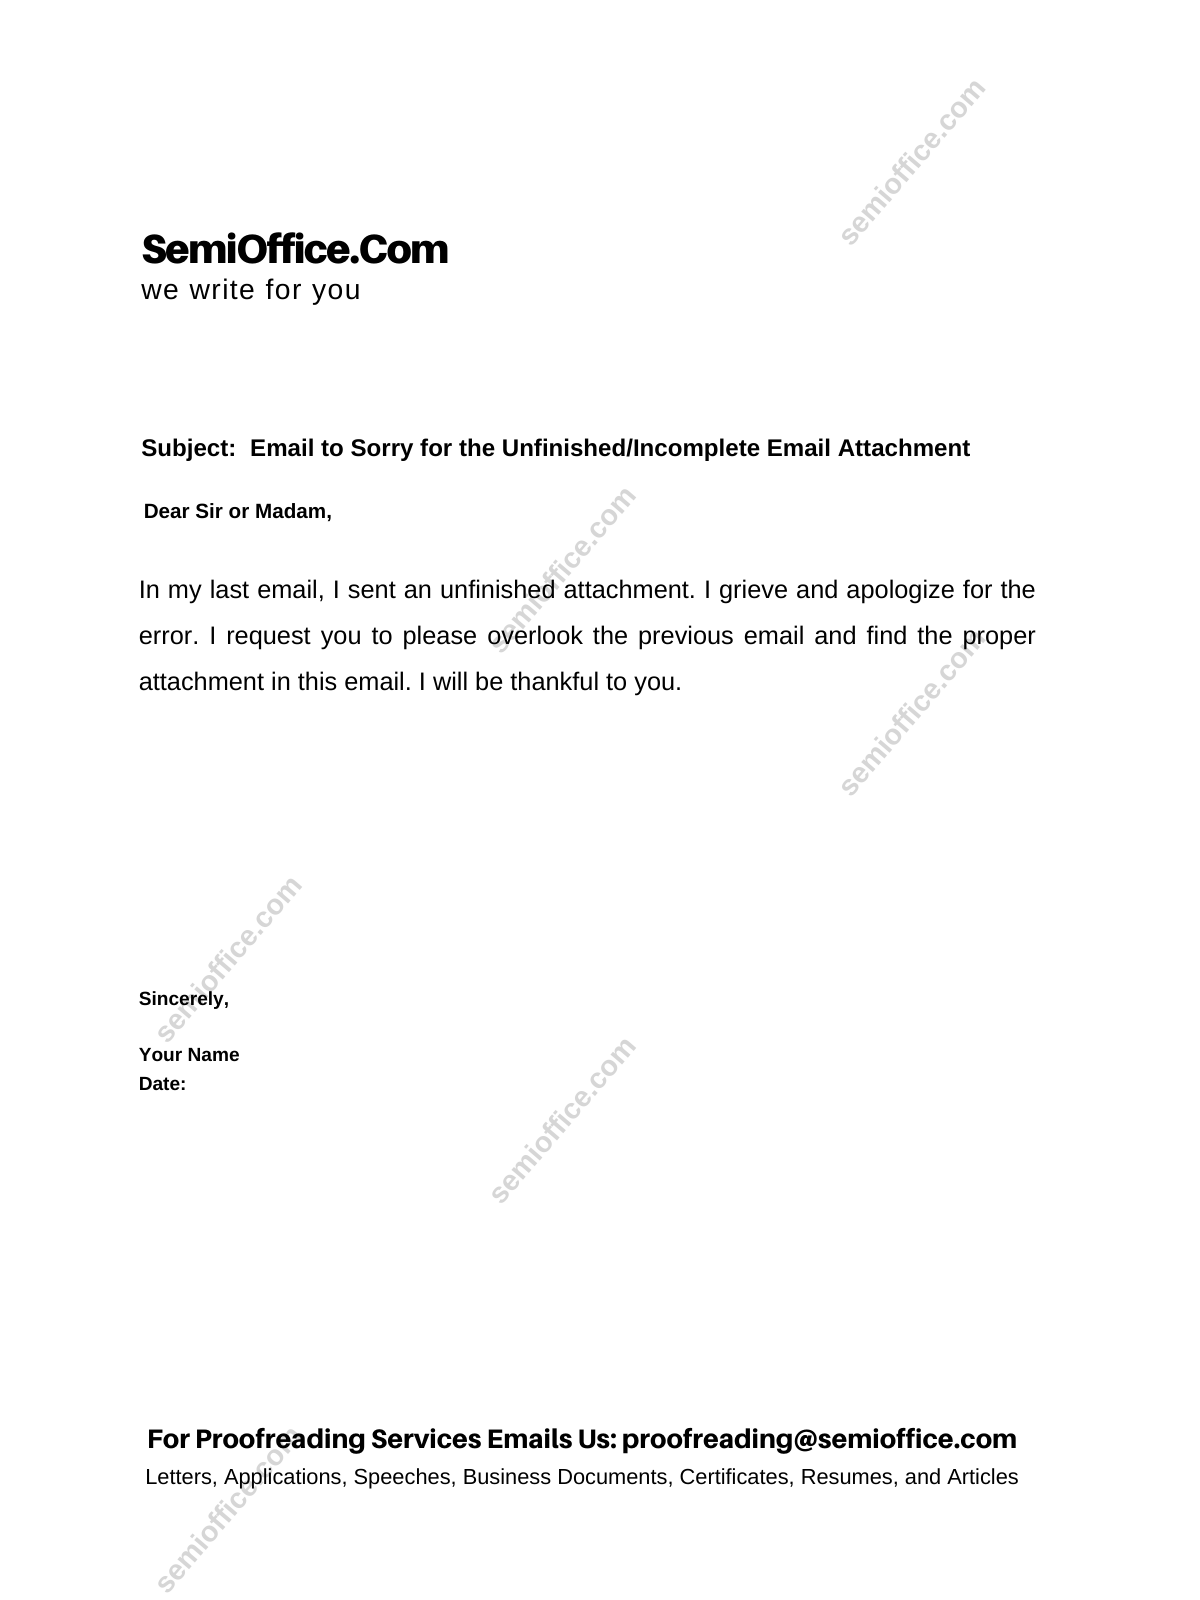 apology-email-for-sending-wrong-attachment-semioffice-com